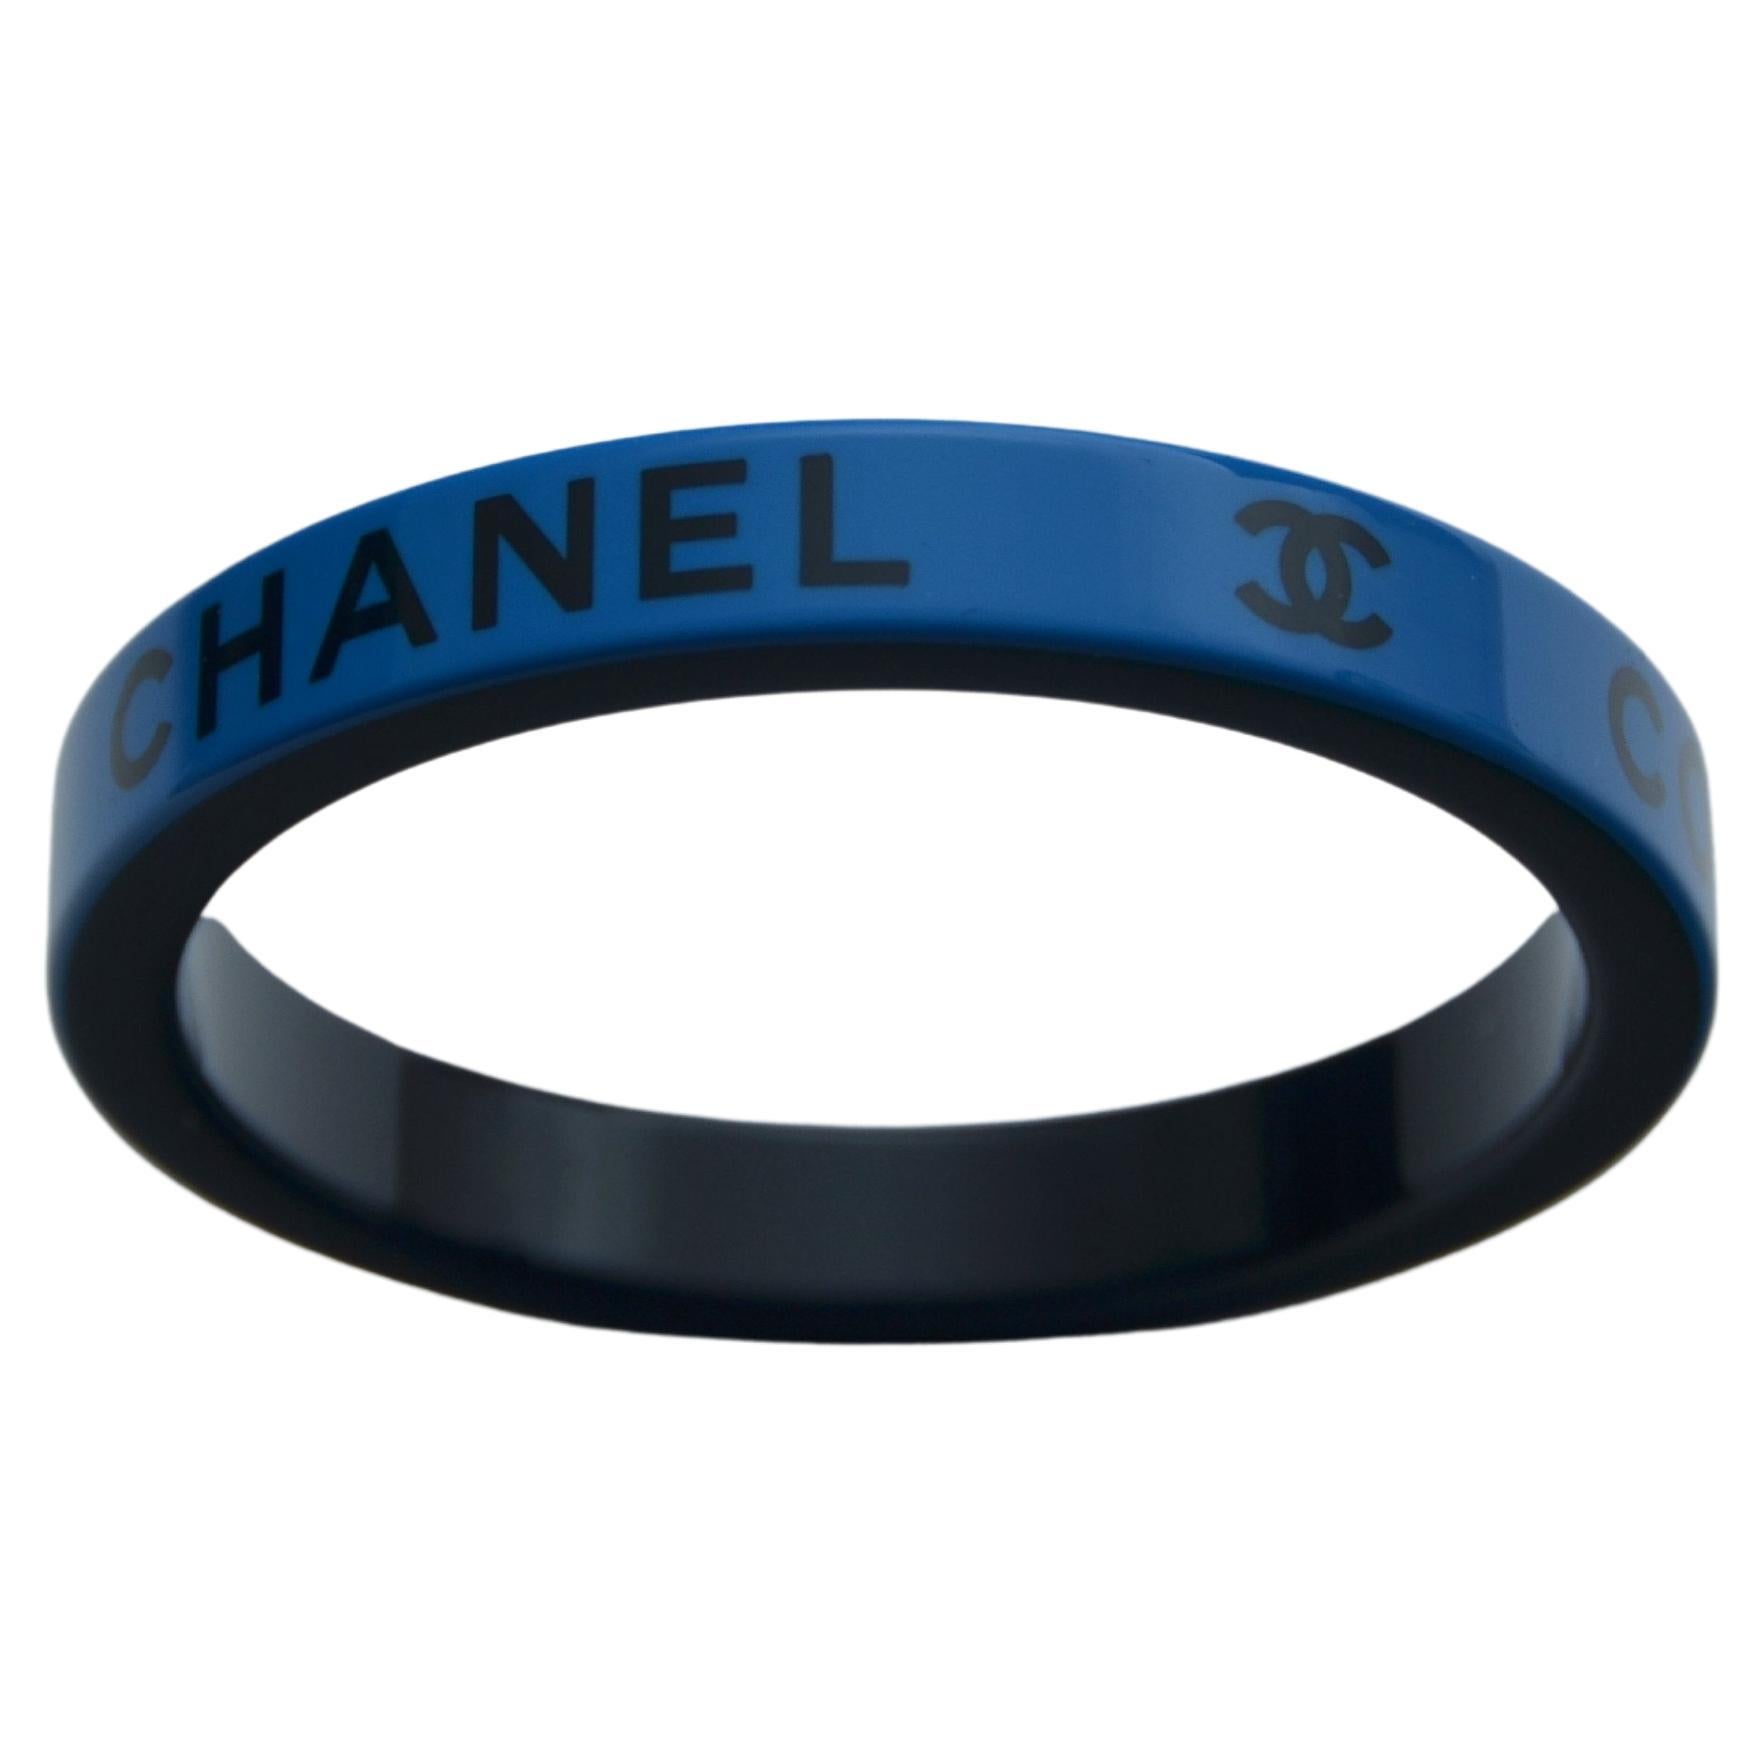 100% authentic guaranteed 
Chanel Blue/Black resin bracelet
New with tags.
One size fit all
FINAL SALE